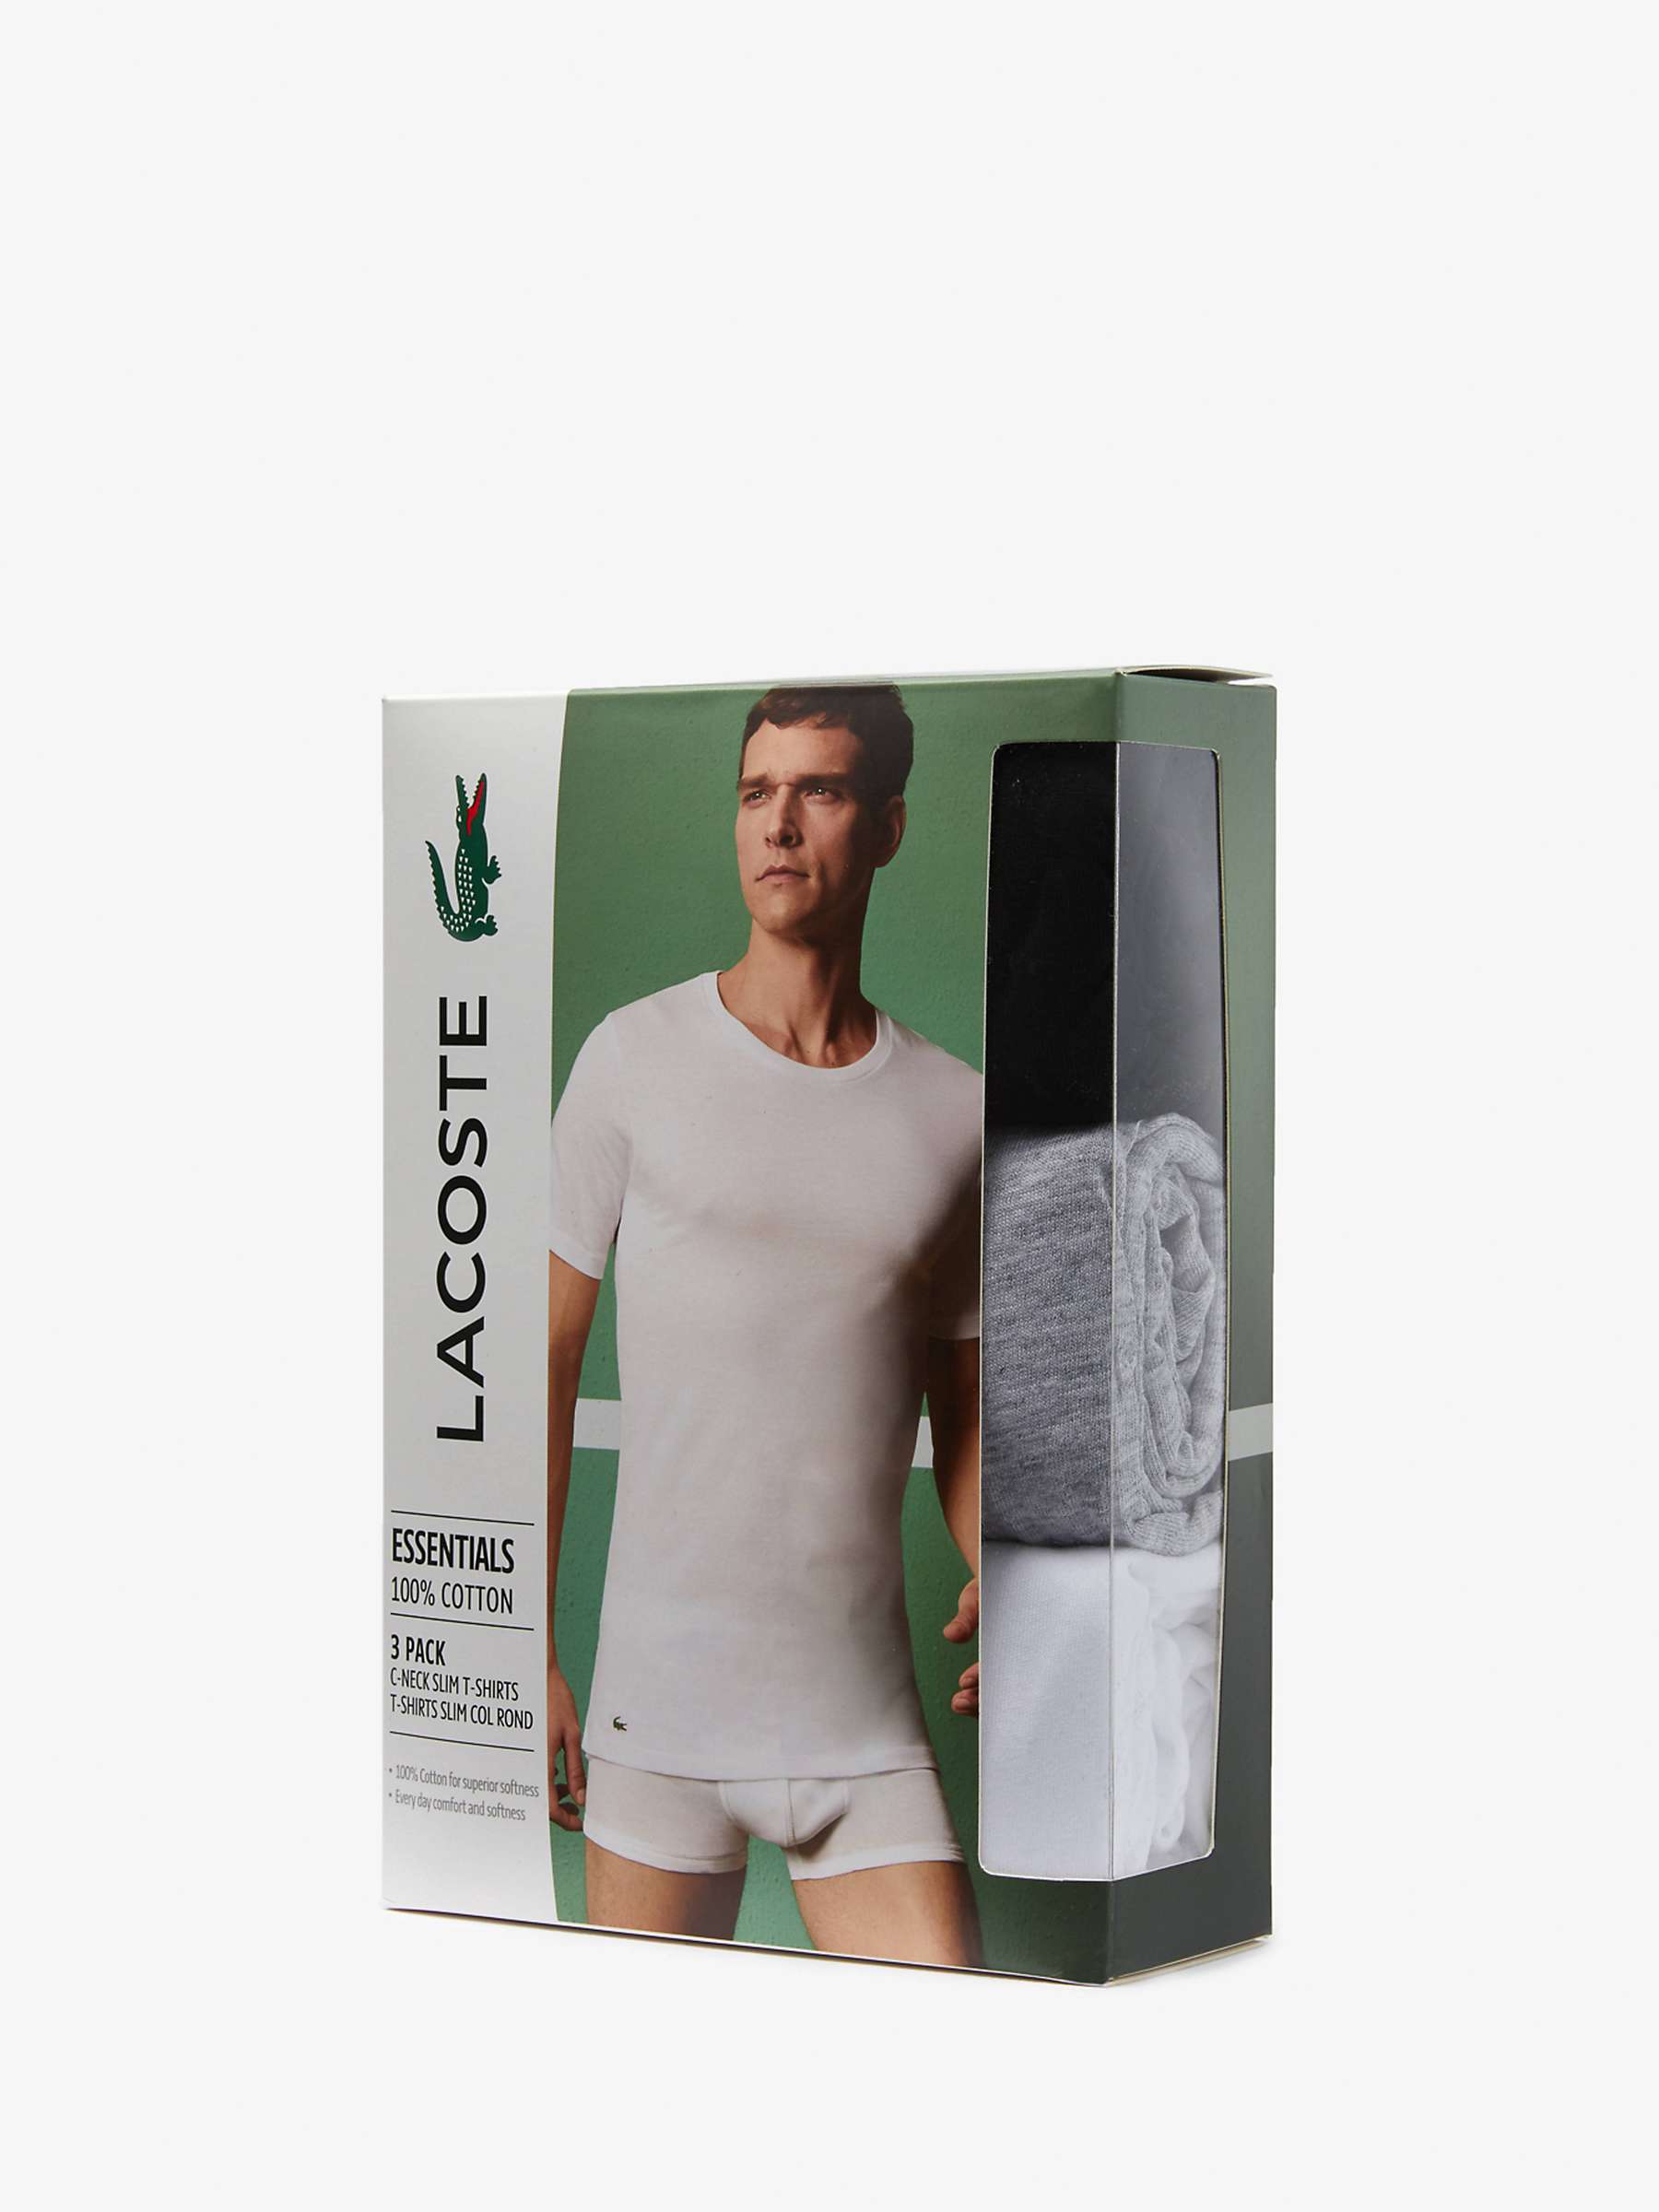 Buy Lacoste Crew Neck Slim T-Shirts, Pack of 3 Online at johnlewis.com